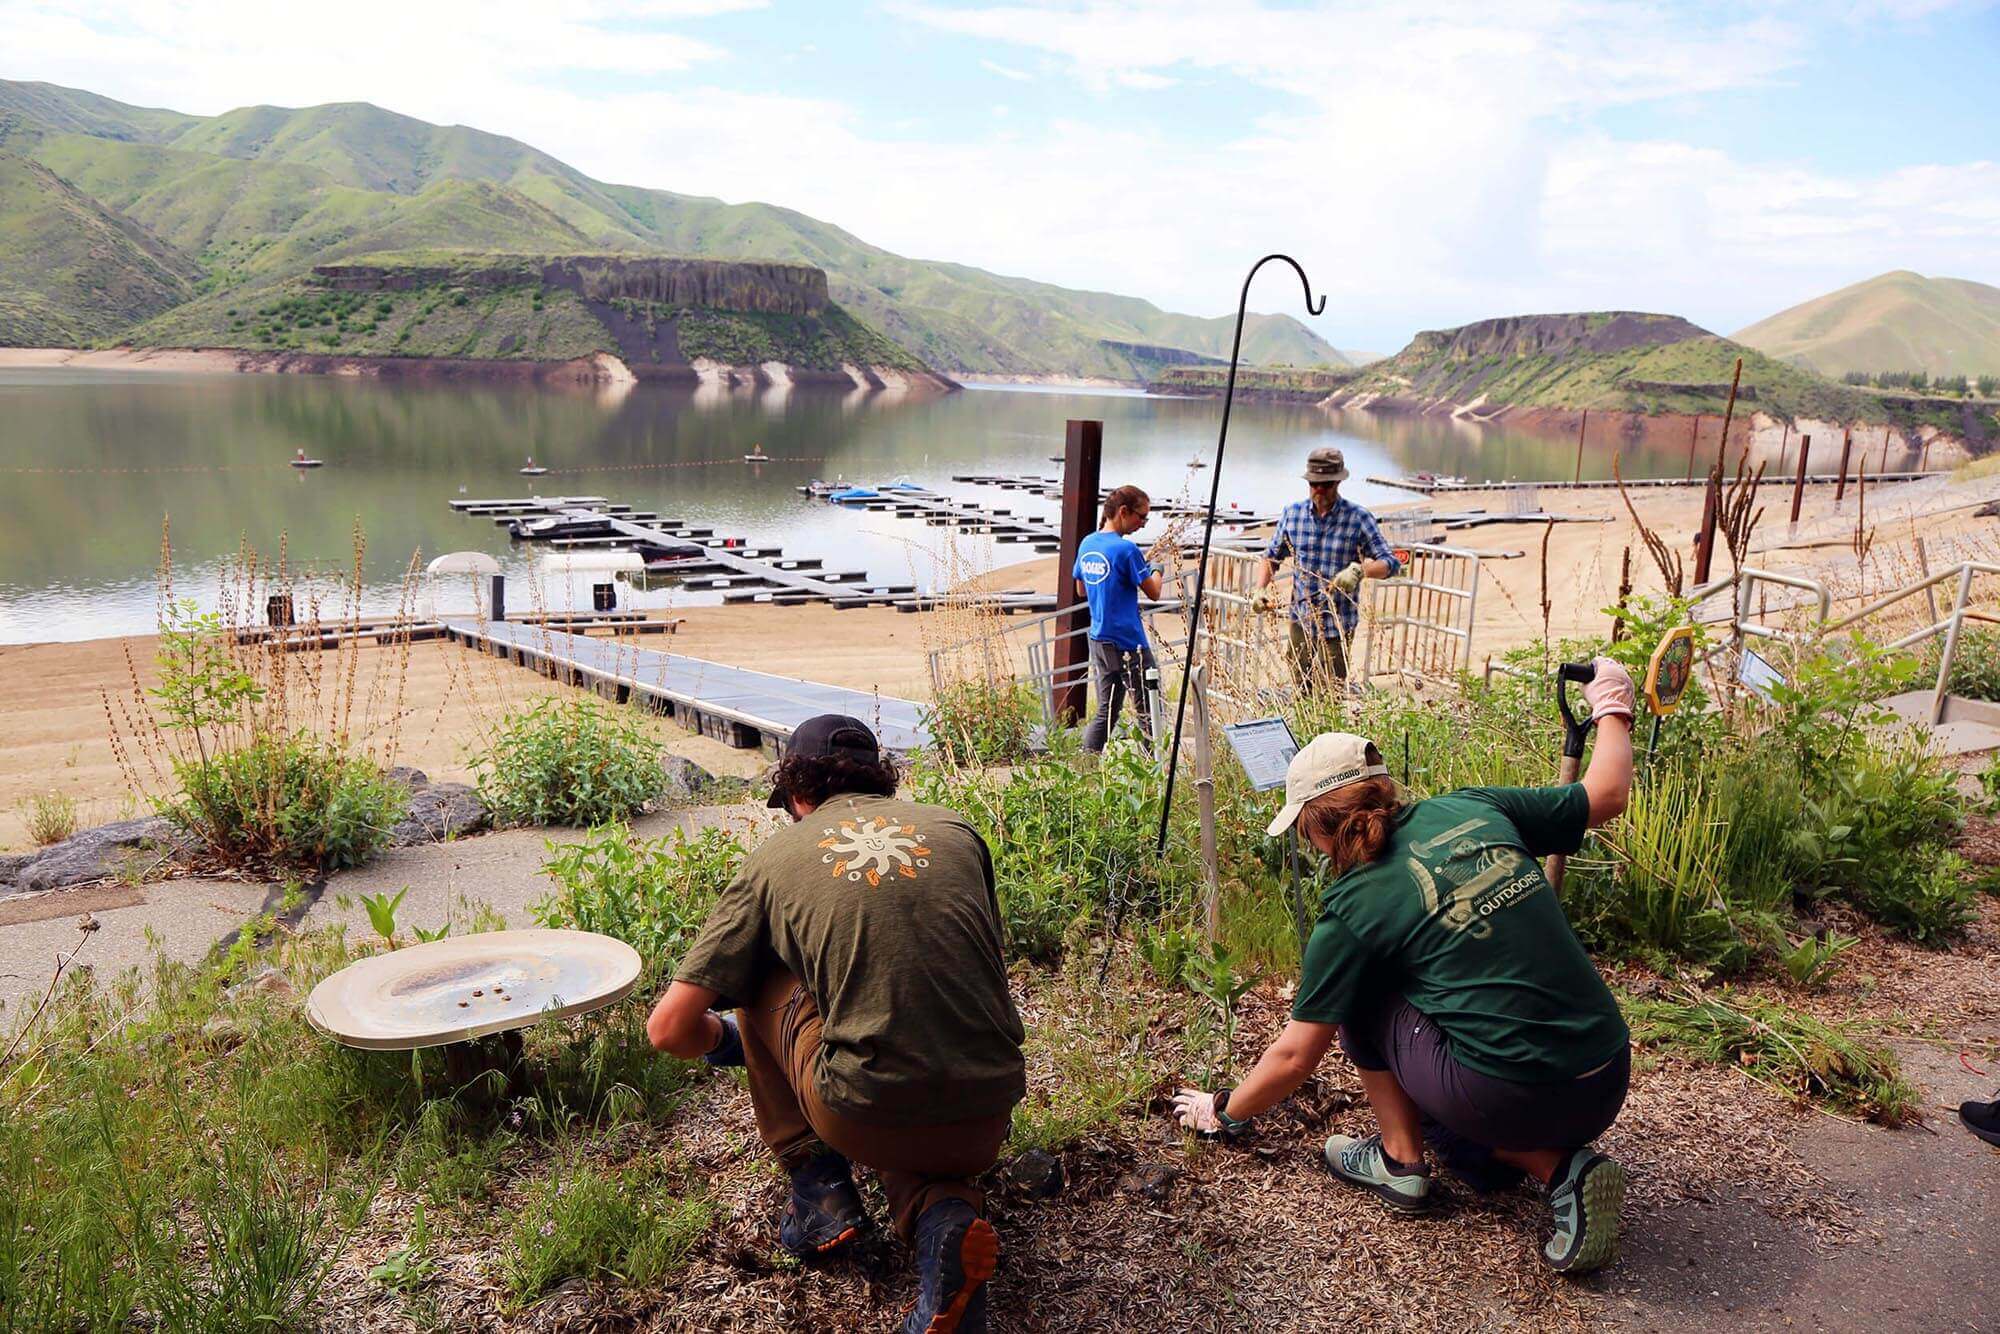 A group of people gardening amidst tall plants at a Travel With Care event and a beach, docks, body of water and mountains in the background.